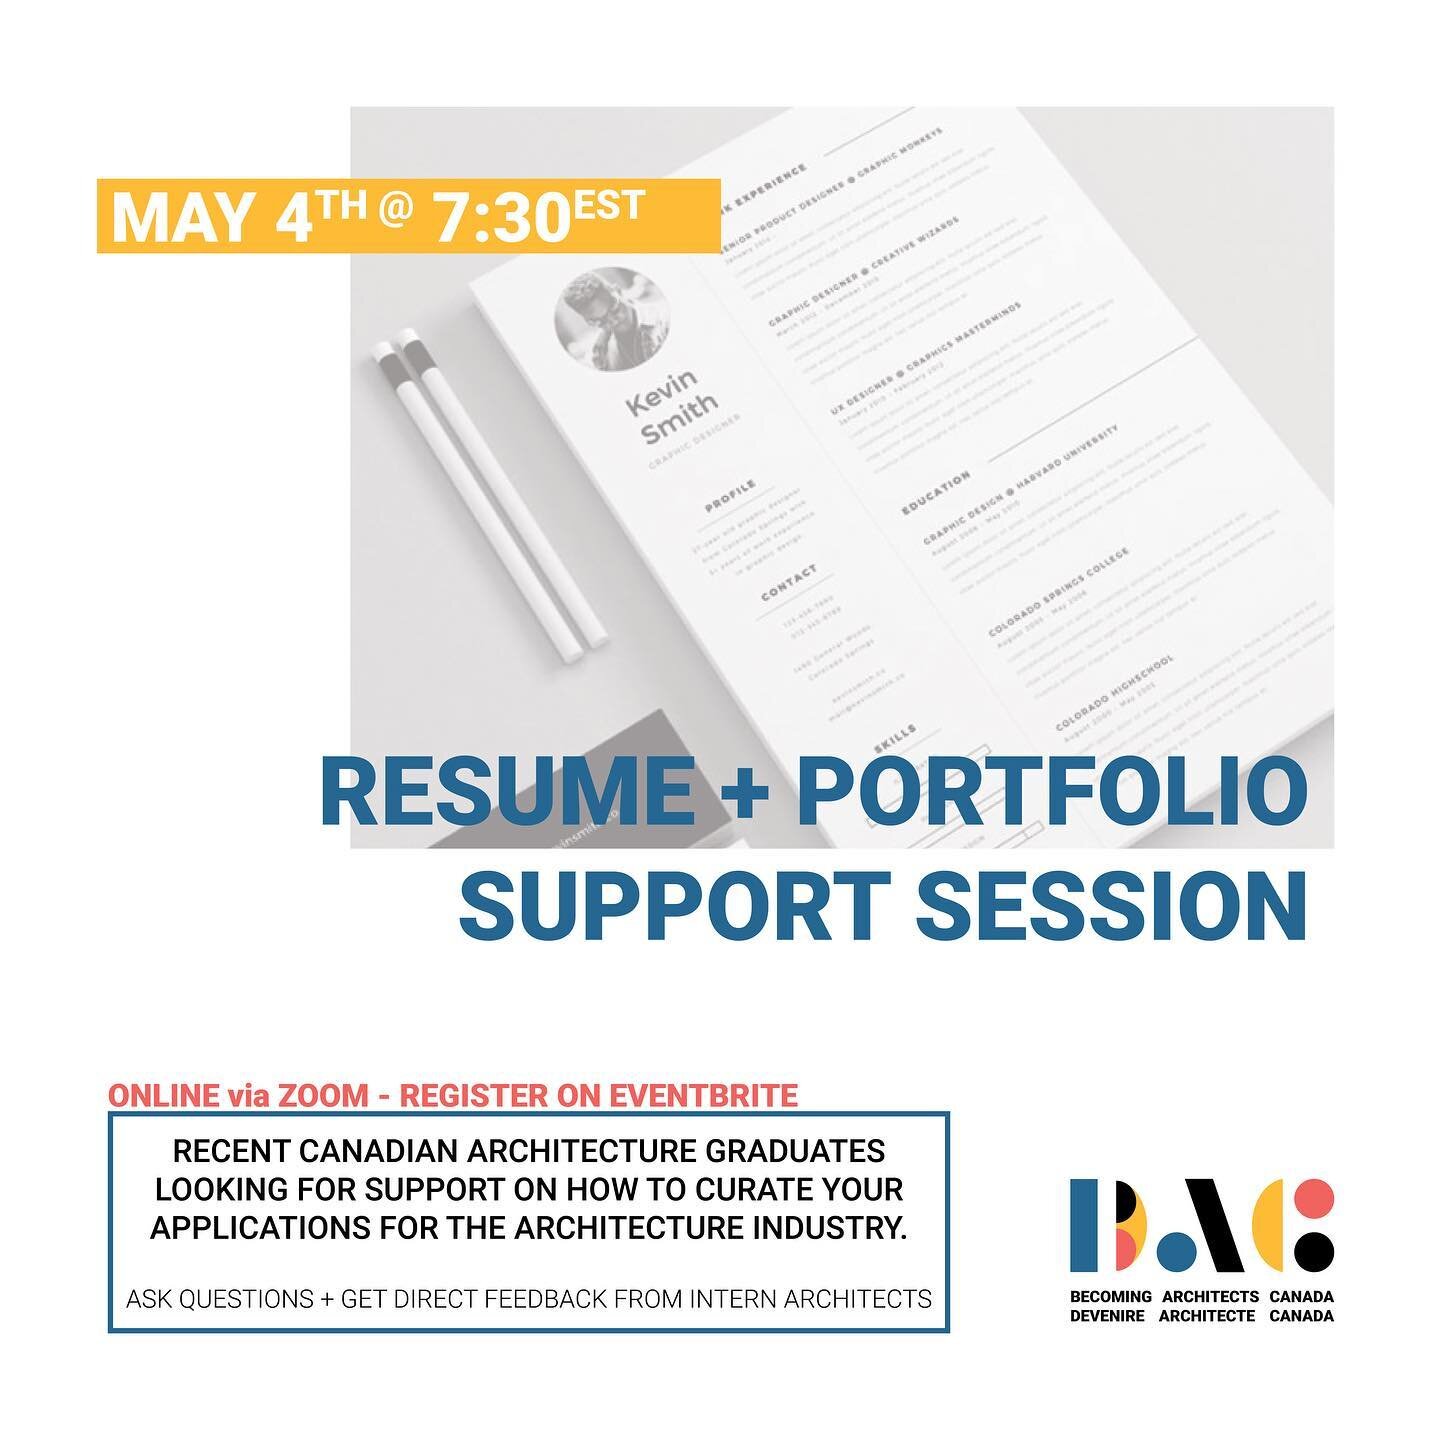 Join us on May 4th for an evening full of discussion and support on strategies to successfully find an architecture internship in Canada. Registration LINK IN BIO
- - 
Joignez-vous &agrave; nous le 4 mai pour une soir&eacute;e pleine de discussions e